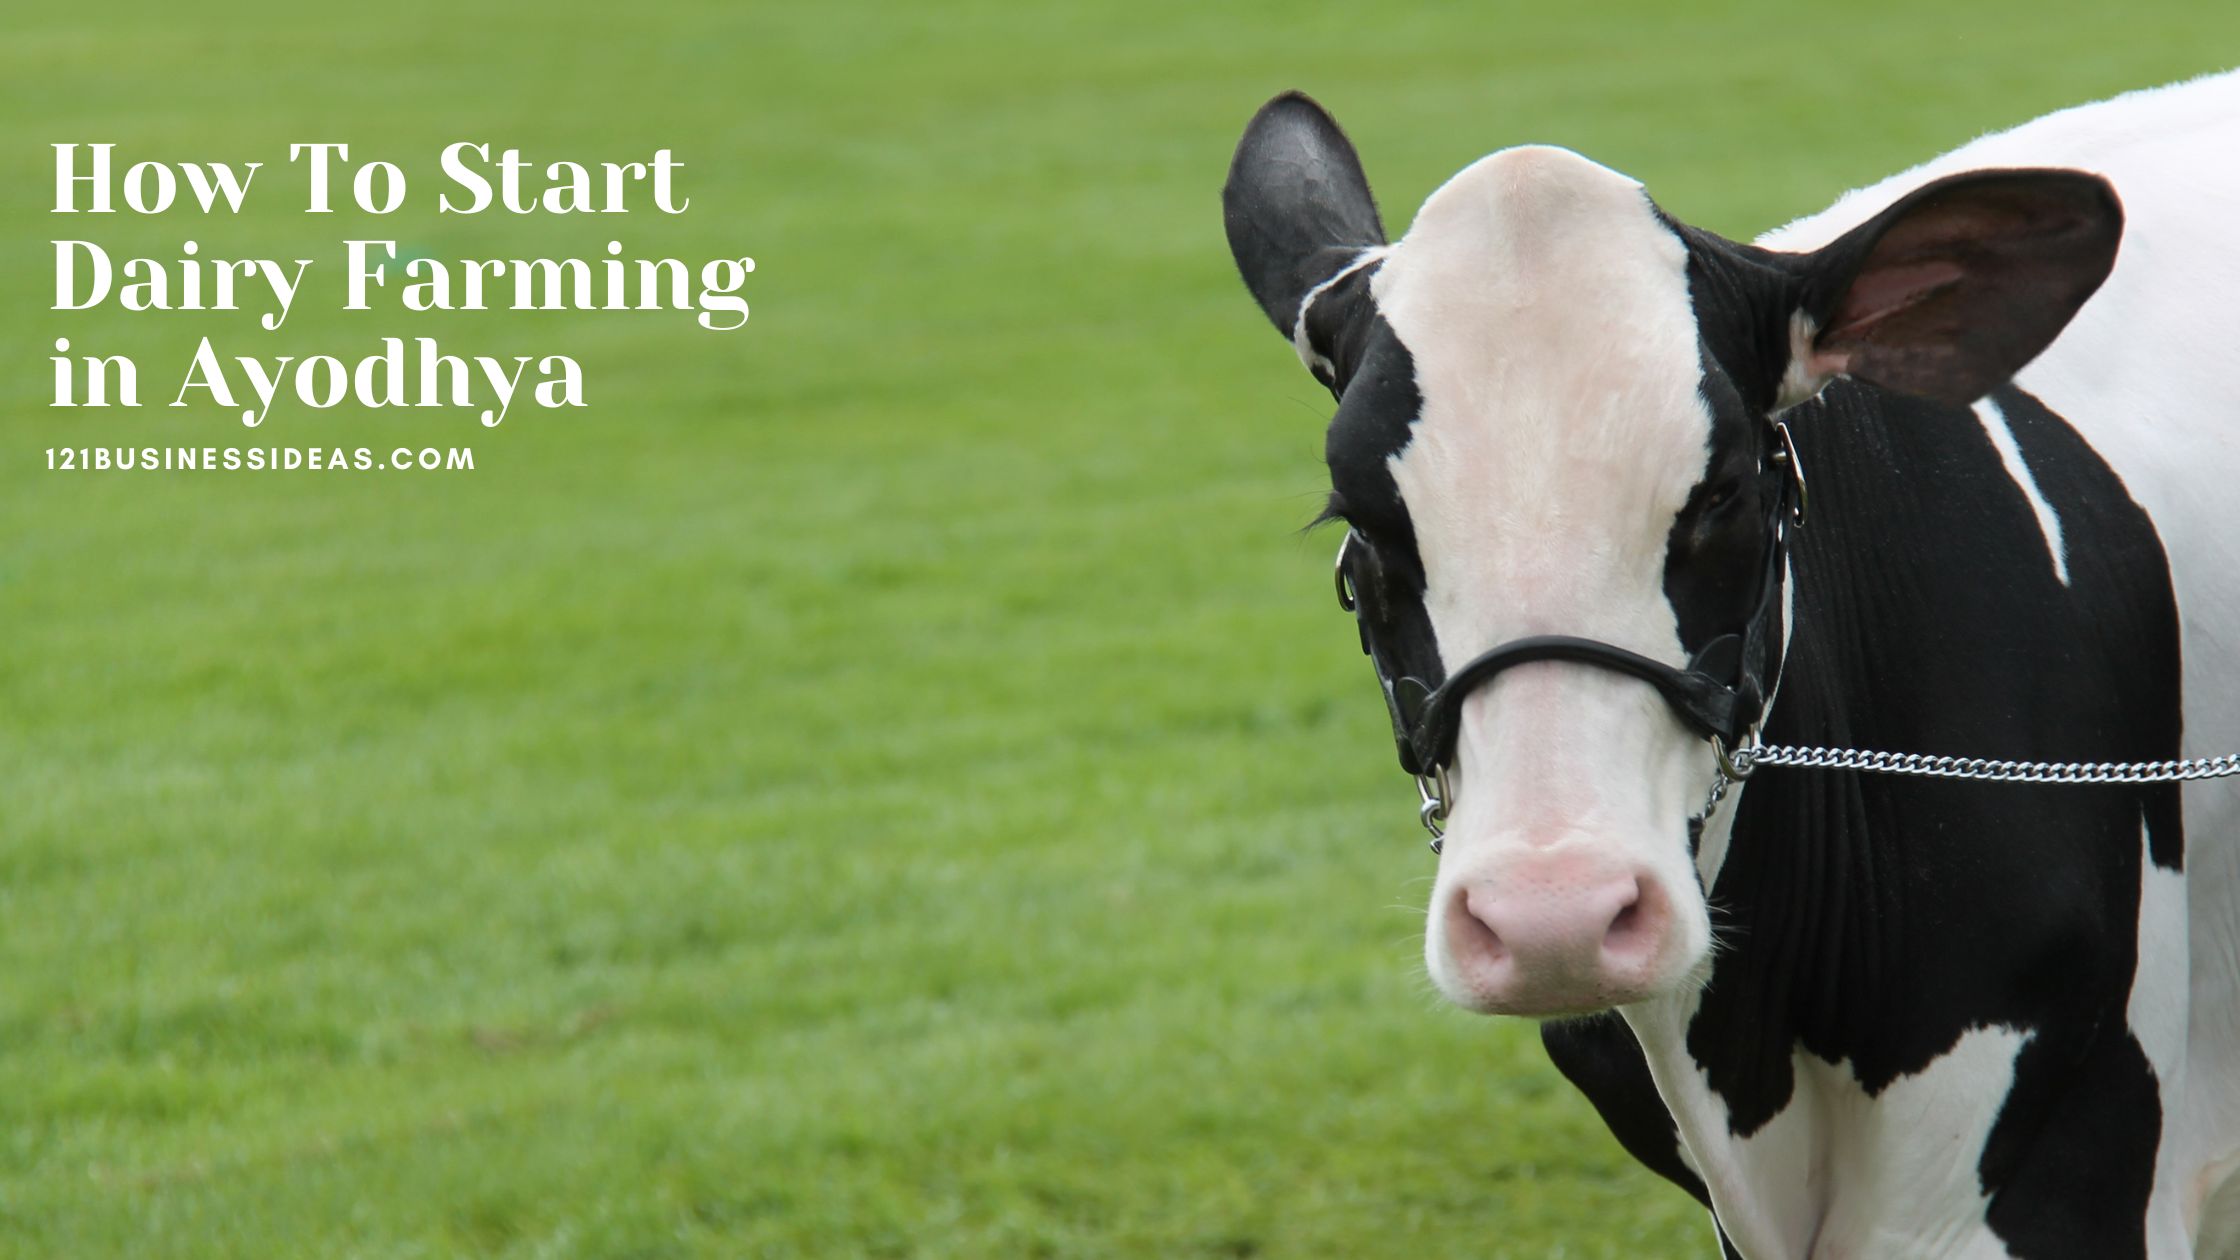 How To Start Dairy Farming in Ayodhya